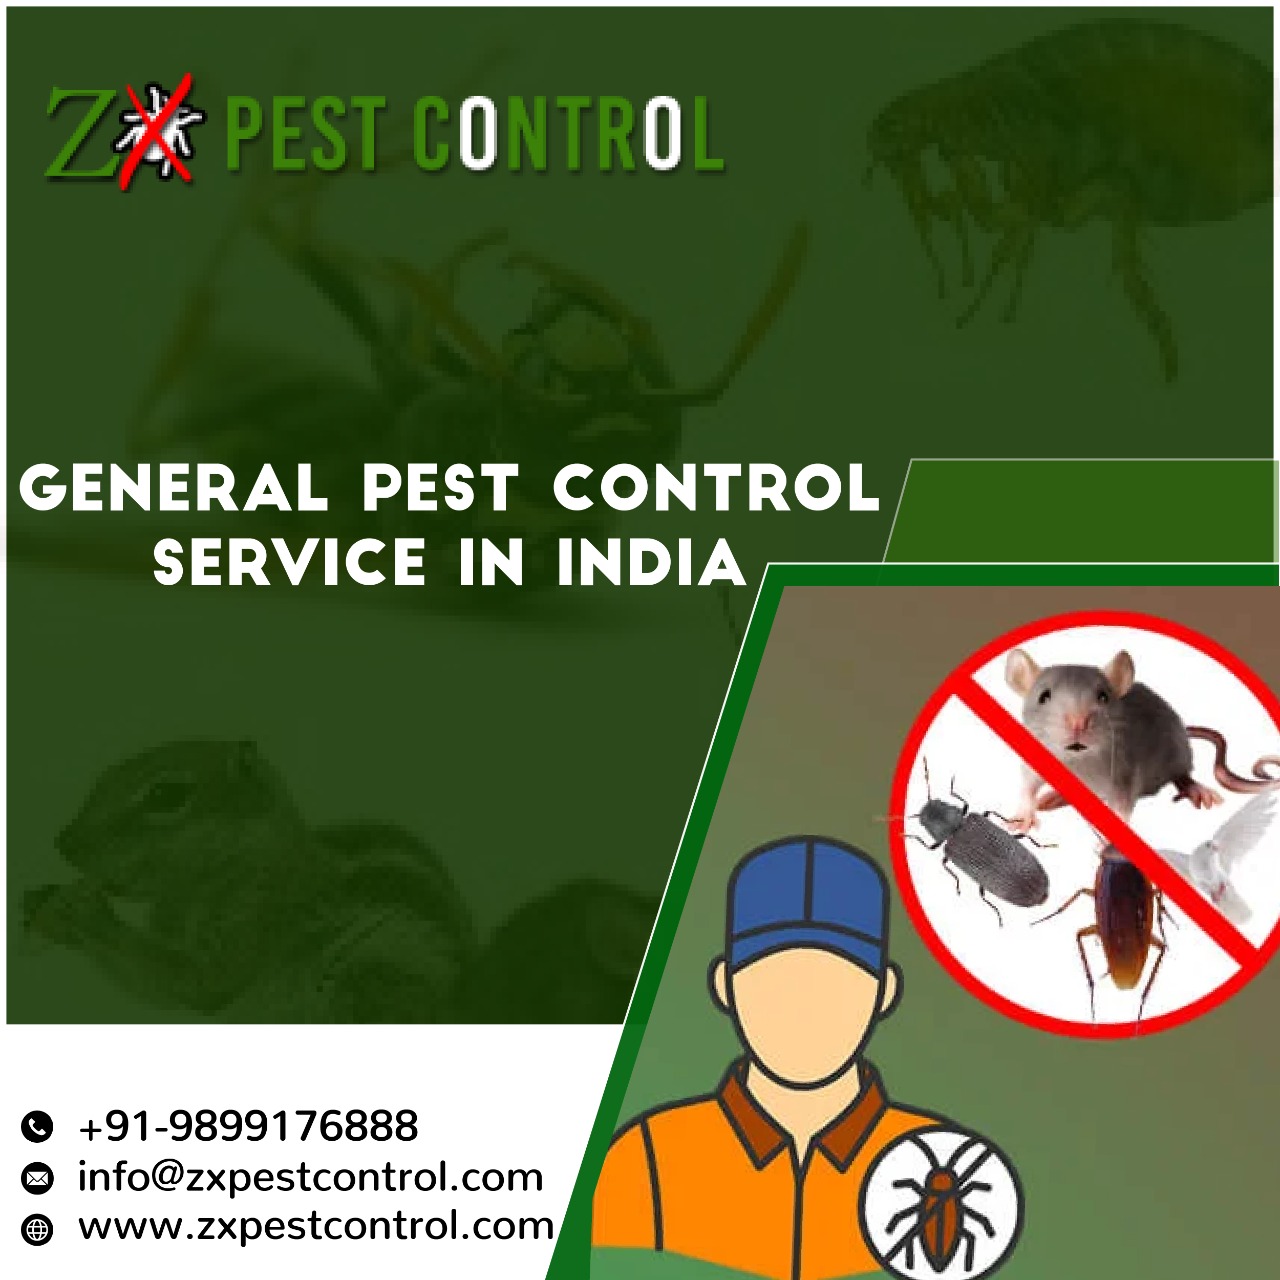 Trusted General pest control service in Noida - Classified Ads Shop